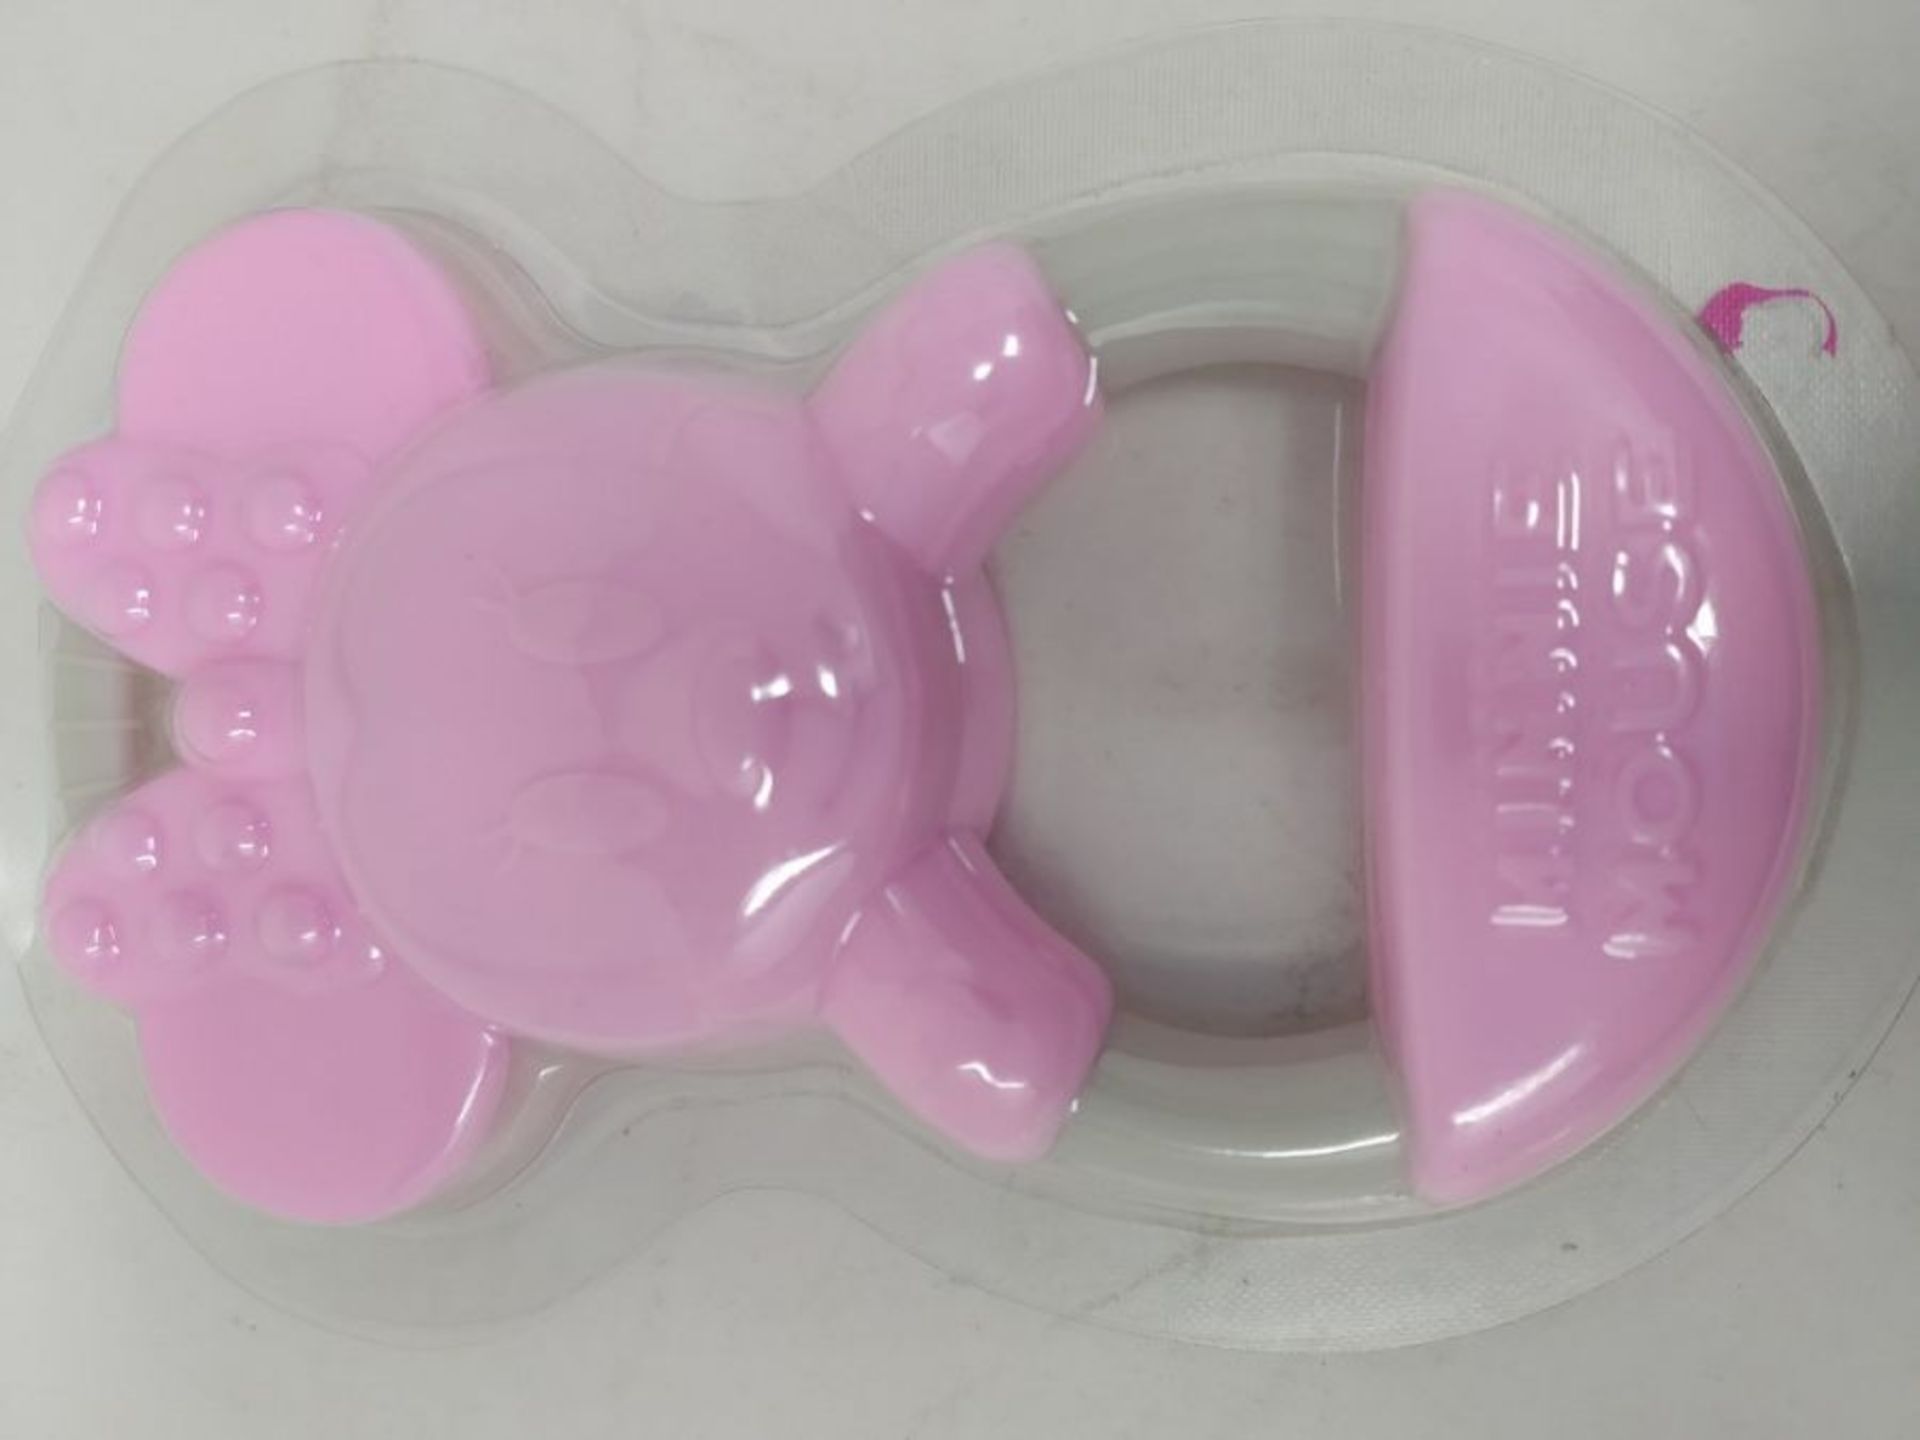 Clementoni 17342 -Disney Minnie New-Born Toys-Baby teether Suitable for 0 Months and O - Image 2 of 2